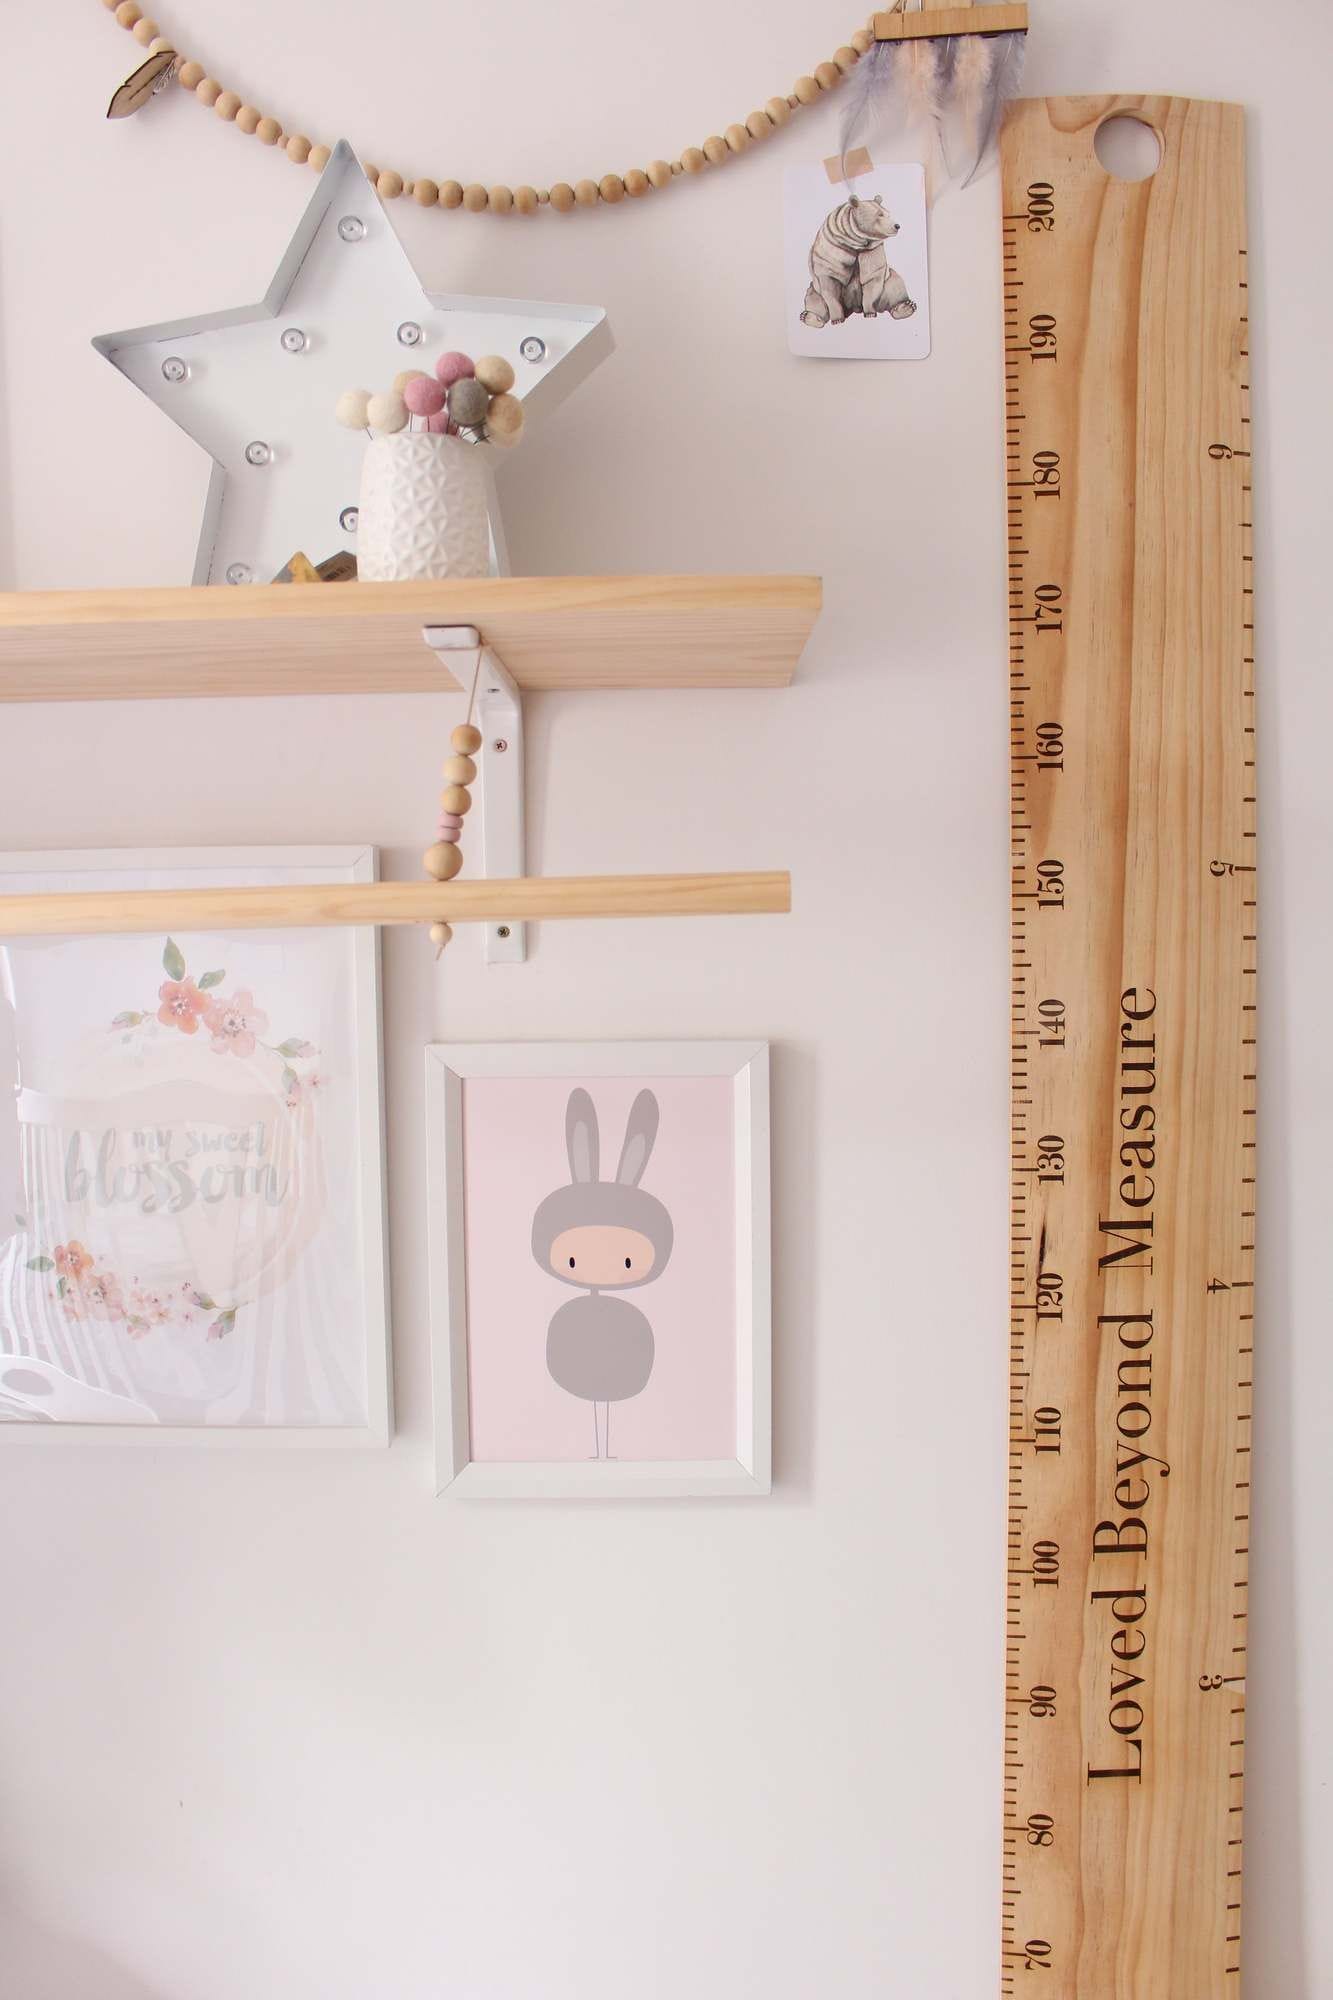 The Old School Ruler Height Chart 'Loved Beyond Measure'